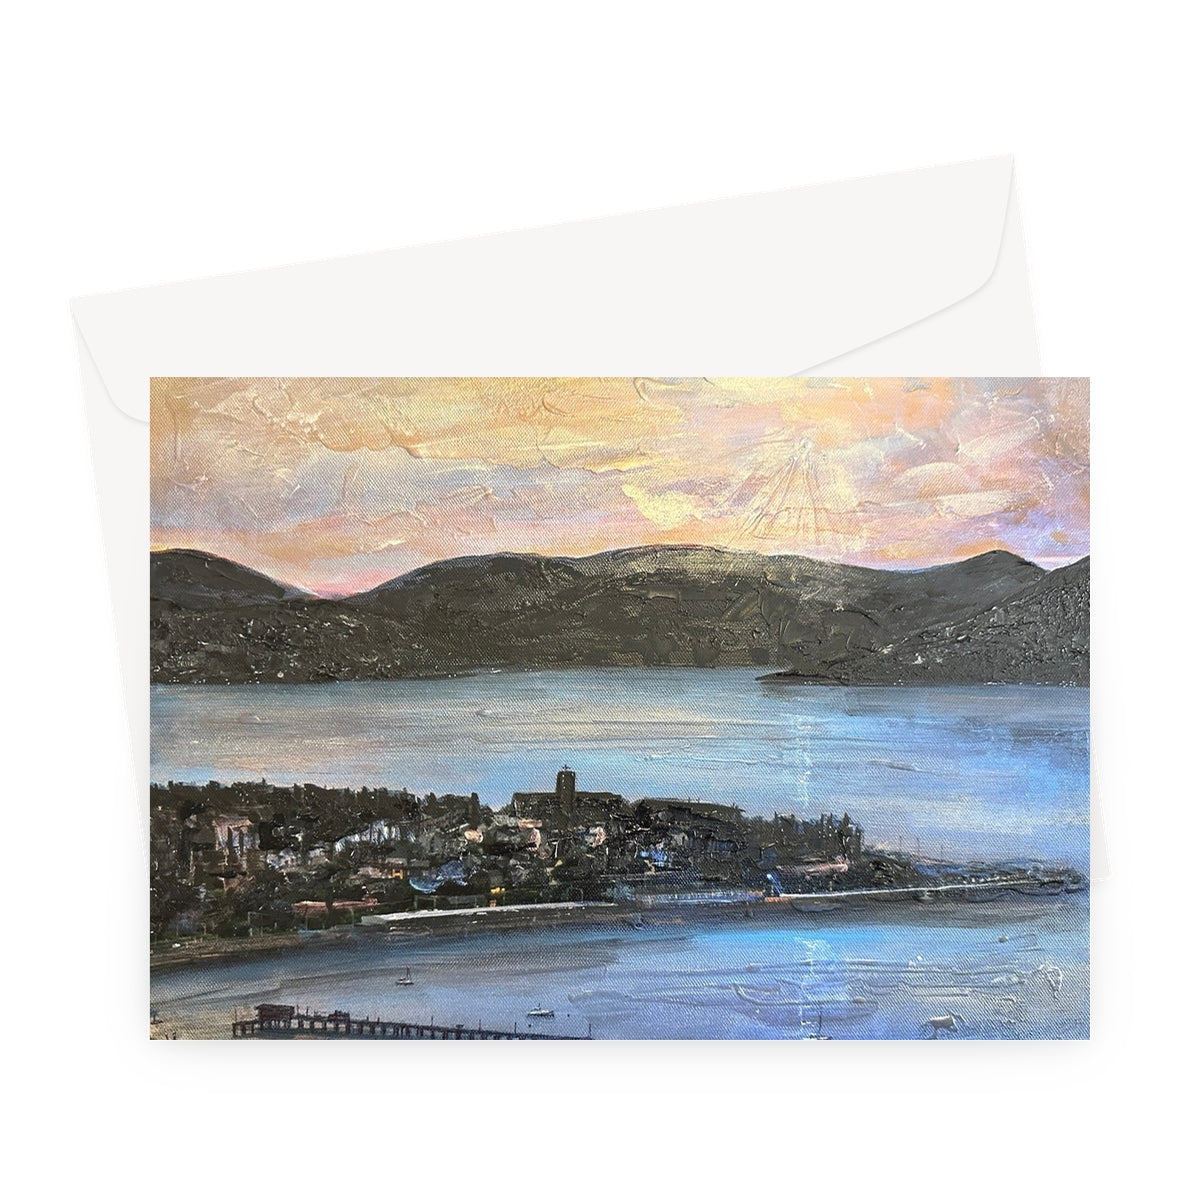 From Lyle Hill Art Gifts Greeting Card-Stationery-River Clyde Art Gallery-A5 Landscape-1 Card-Paintings, Prints, Homeware, Art Gifts From Scotland By Scottish Artist Kevin Hunter